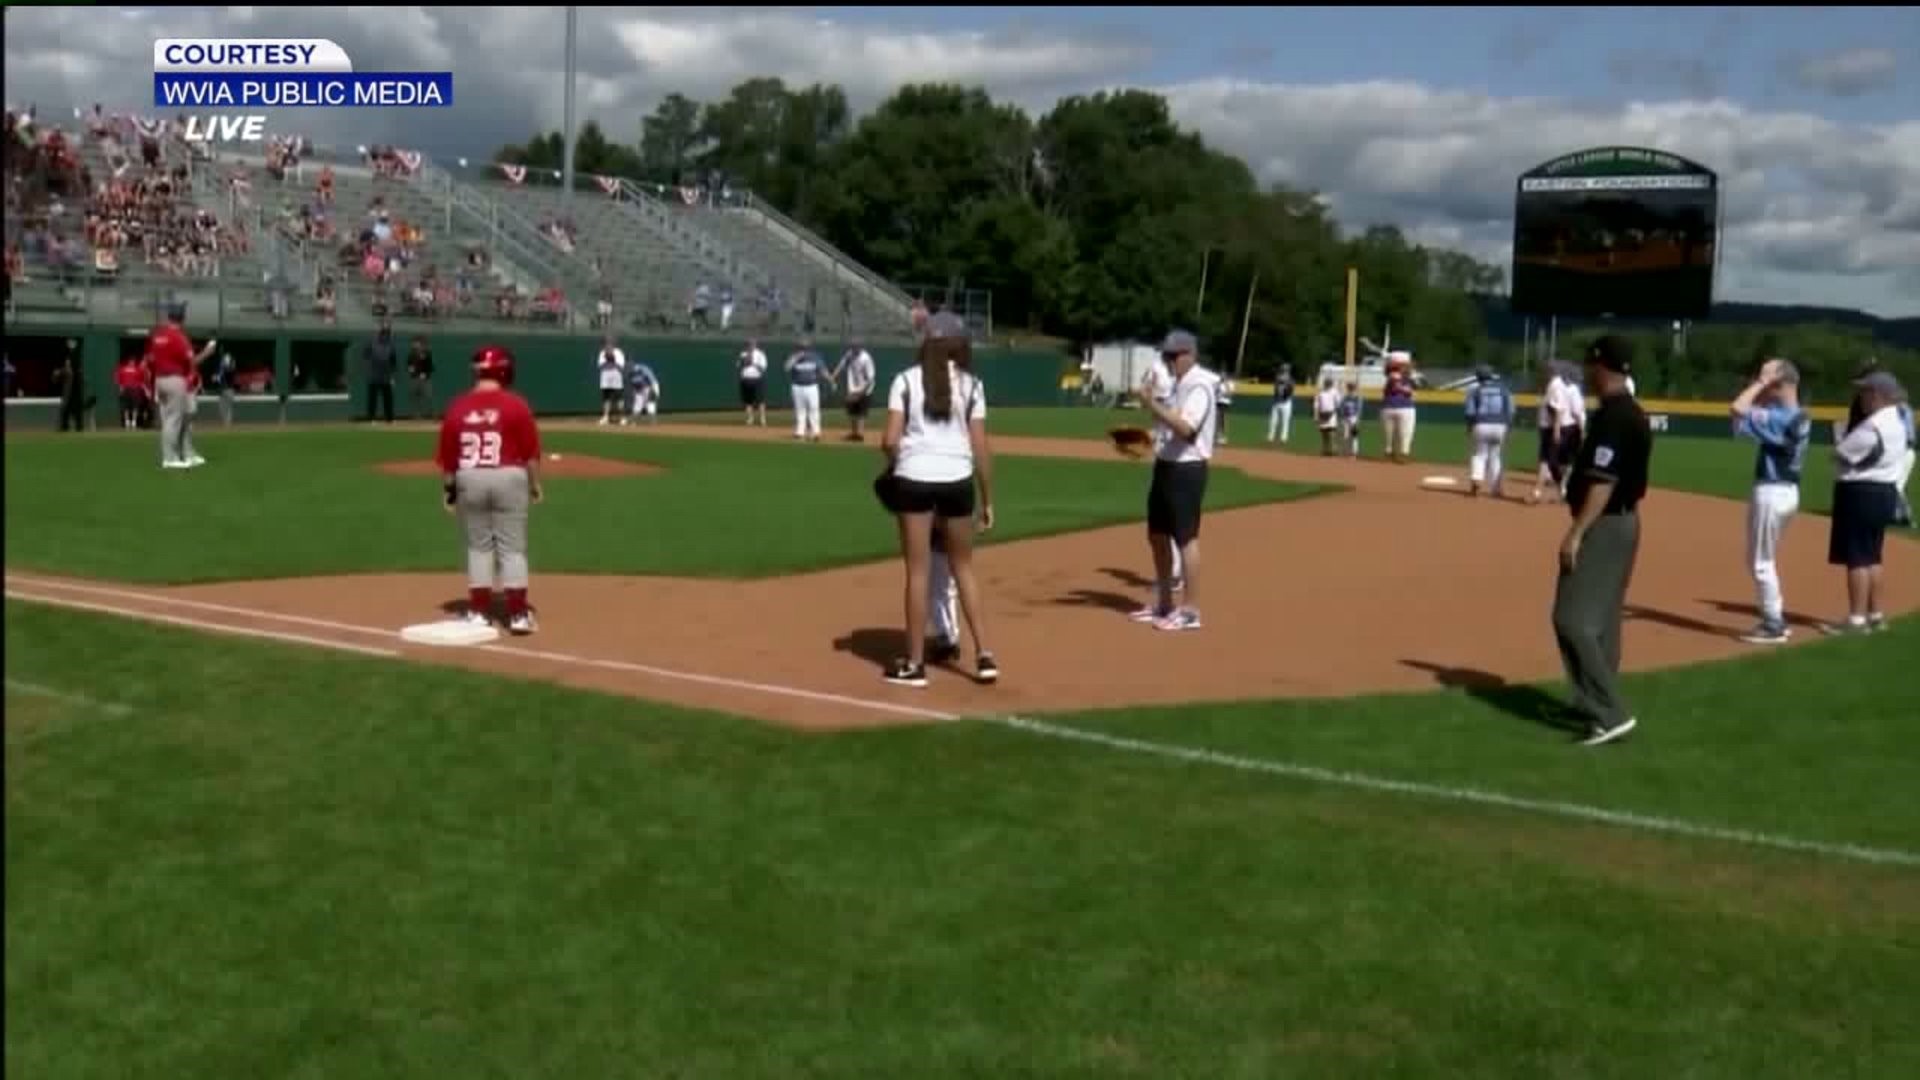 Annual Challenger Game at the Little League World Series